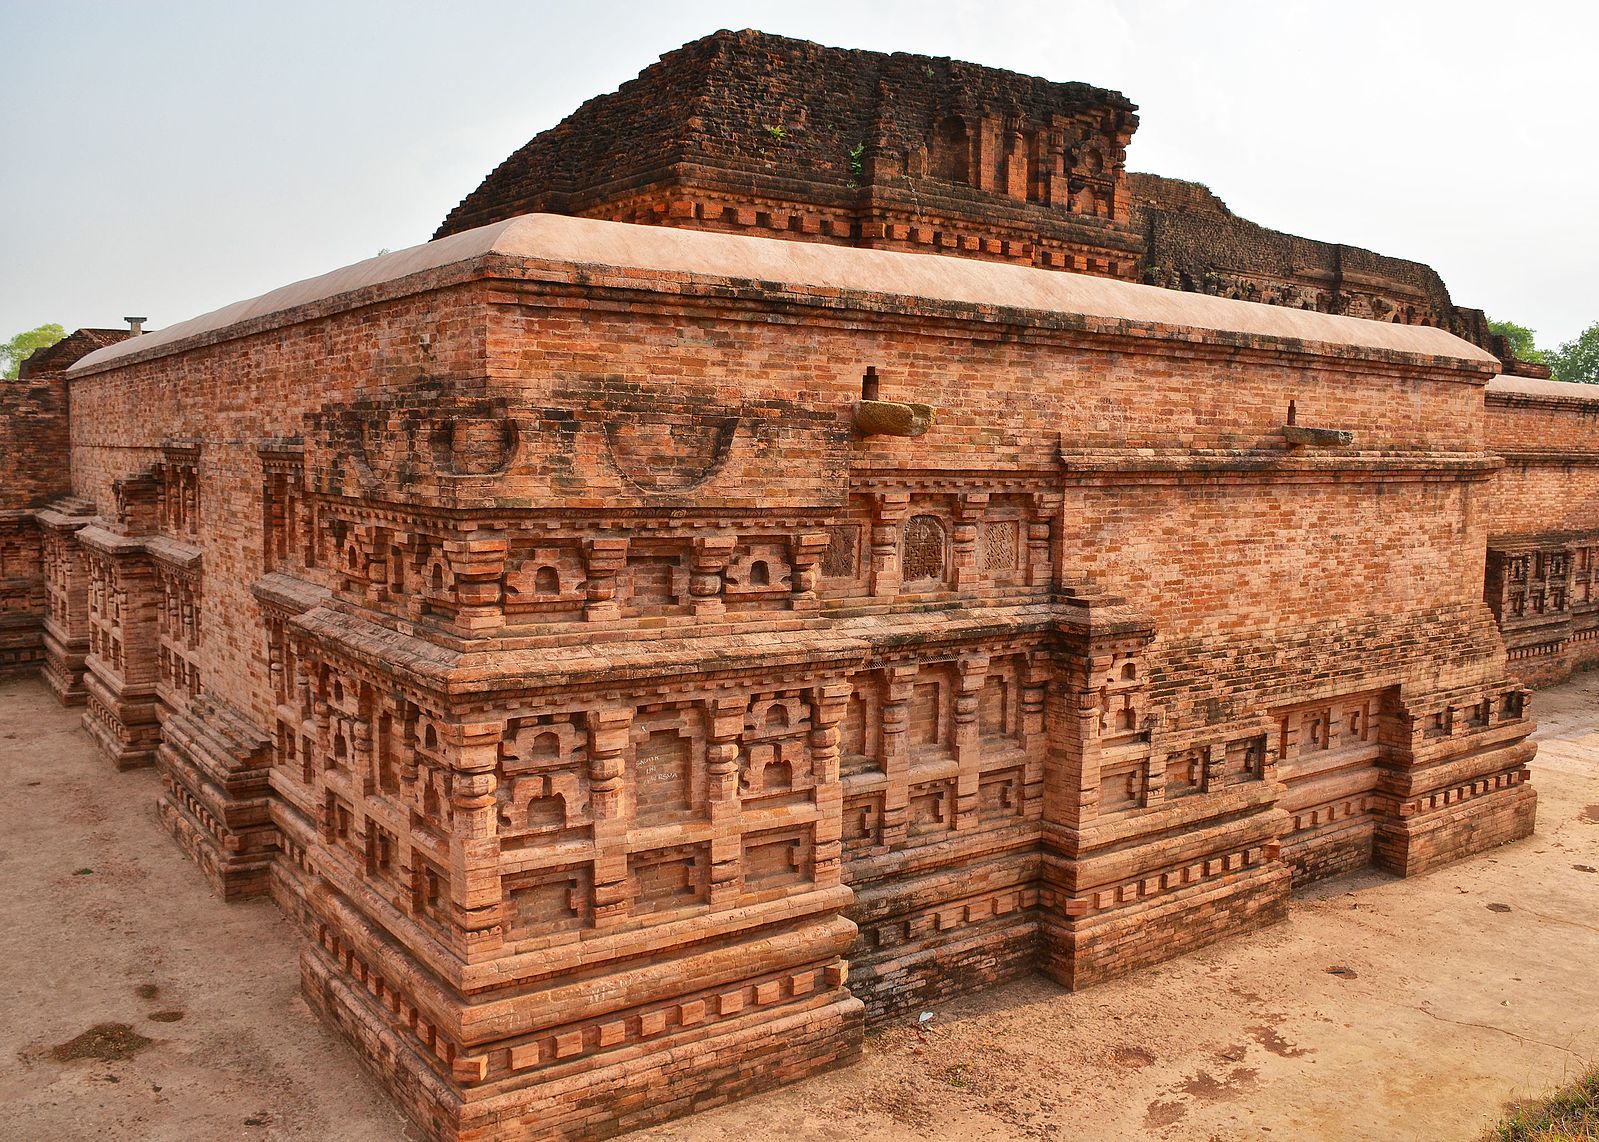 Nalanda: The Ancient Seat of Learning in India